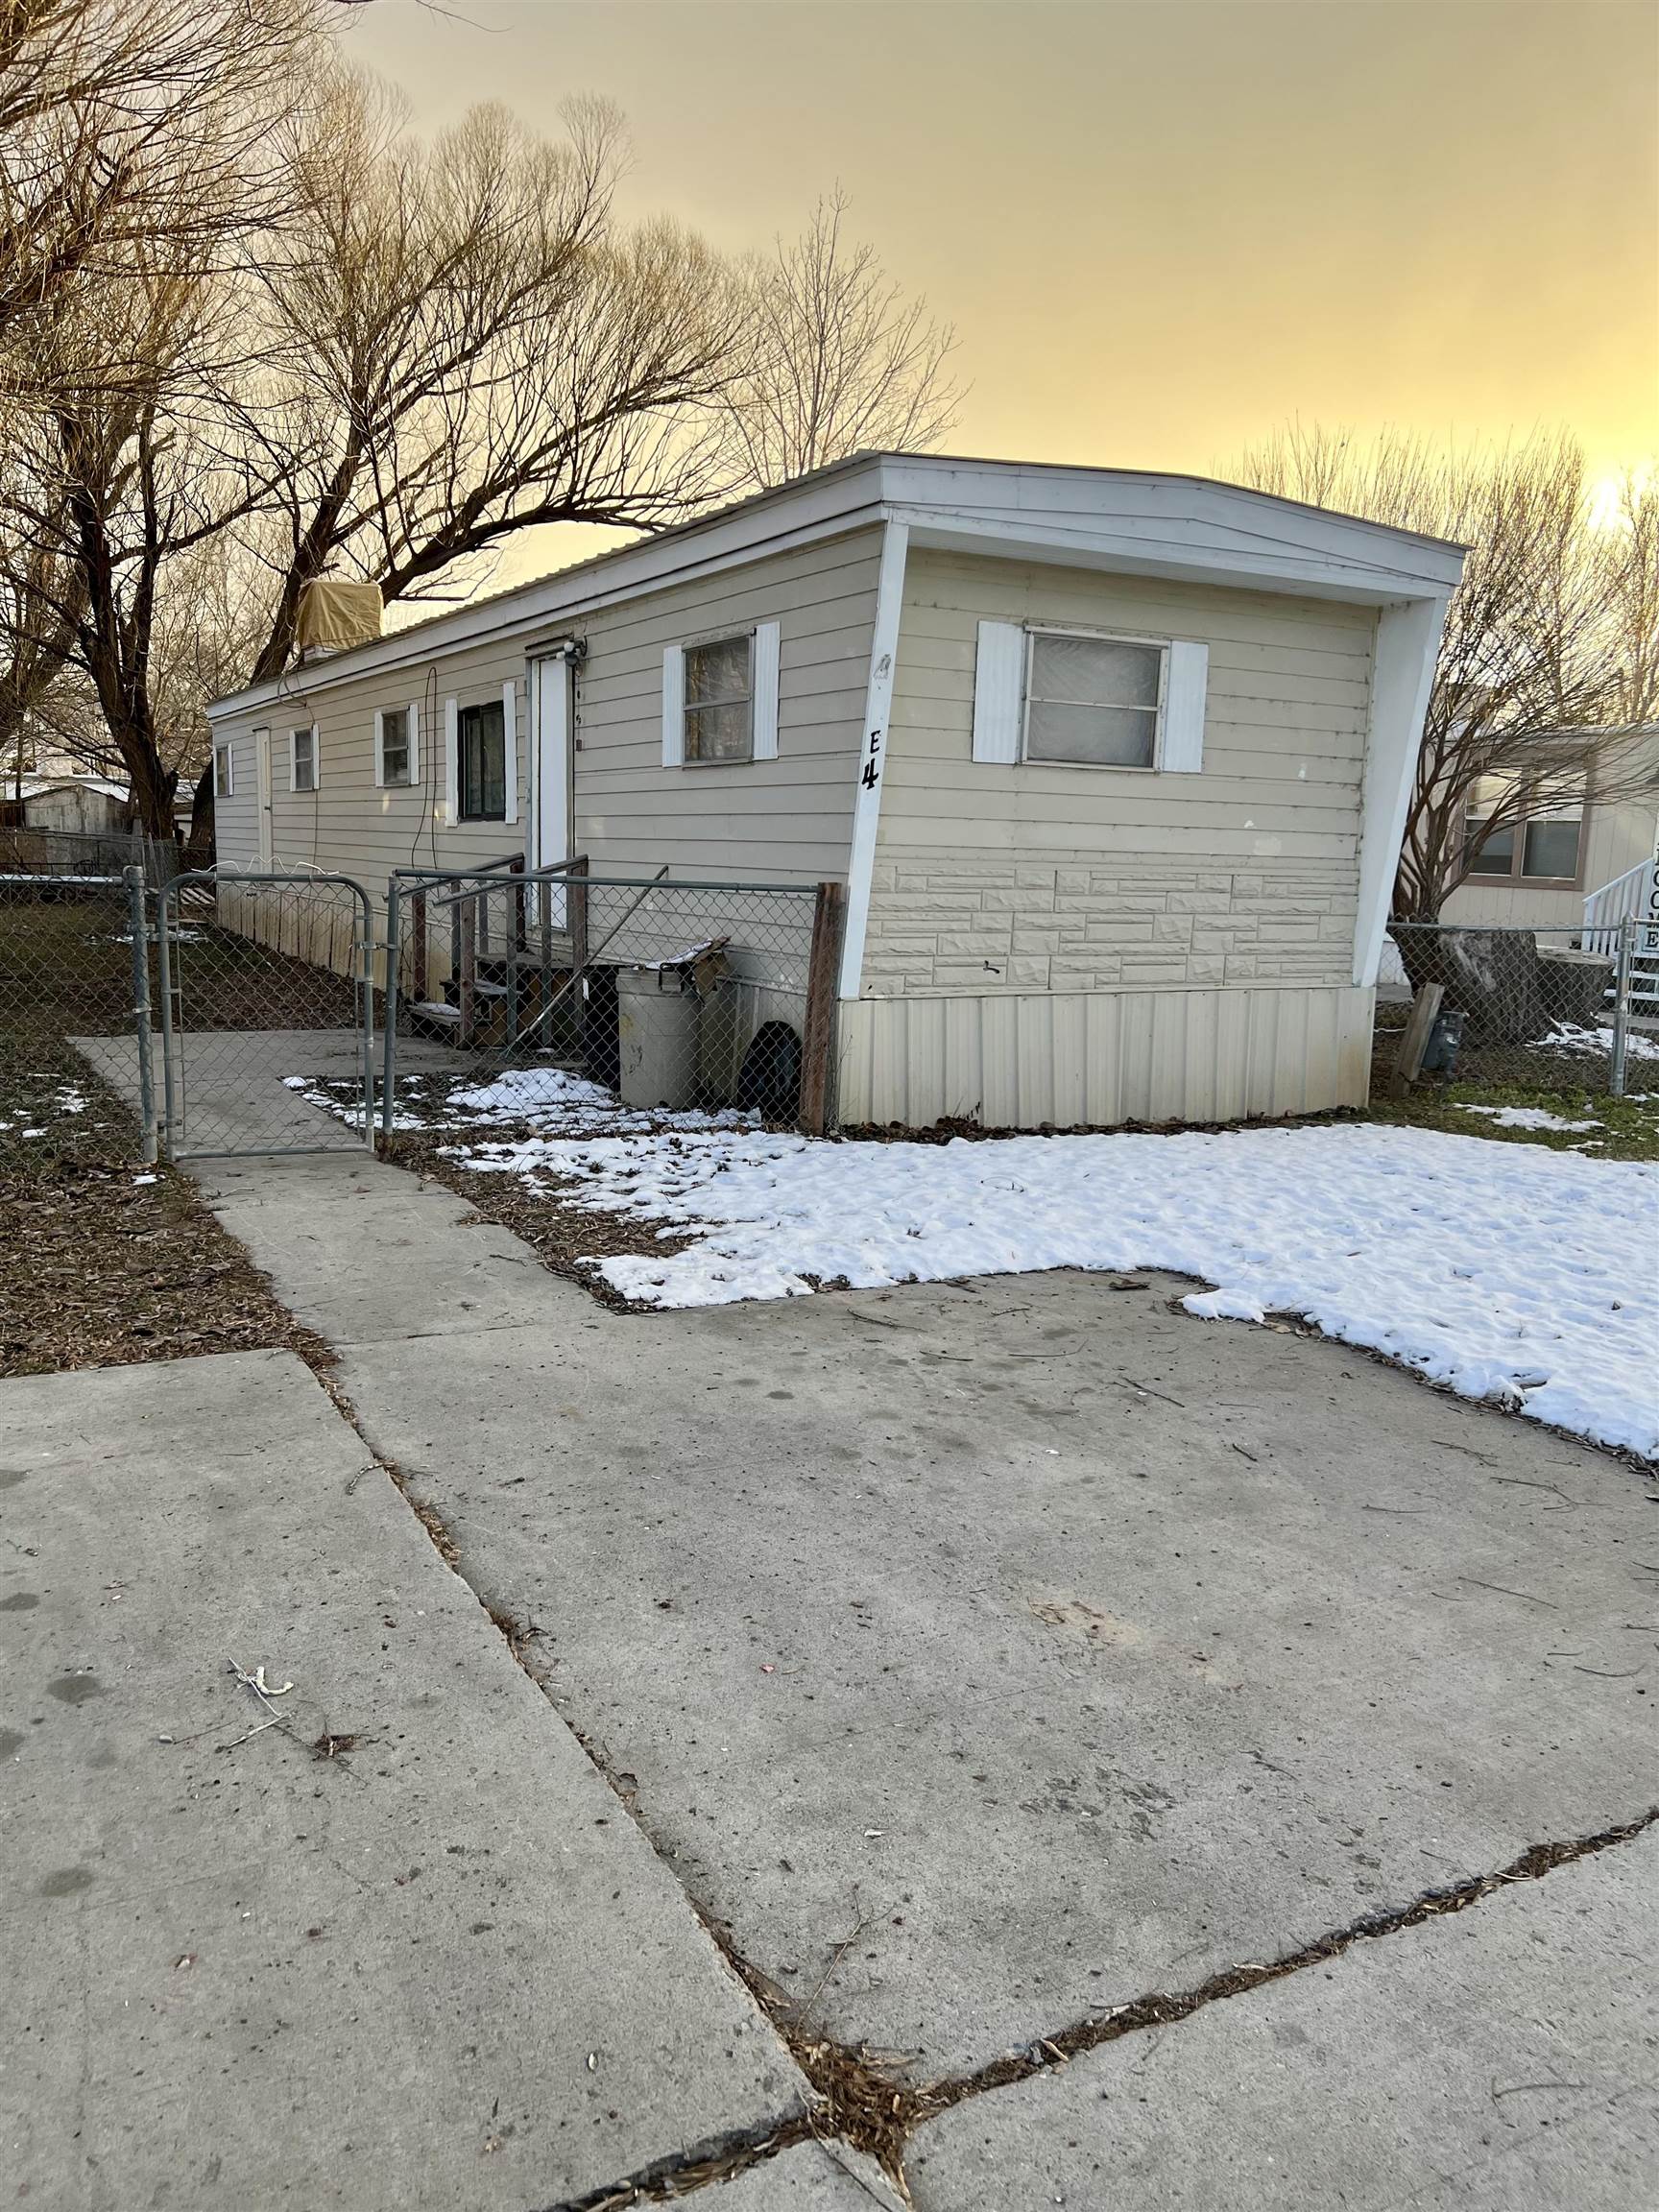 Desirable Fruita location. Single wide manufactured home with a new metal roof in 2019. Seller also replaced all water lines in the home in 2019. Seller also installed a new heater in 2019. Mature landscaping. No REAL ESTATE included - Lot Lease terms and application process apply.